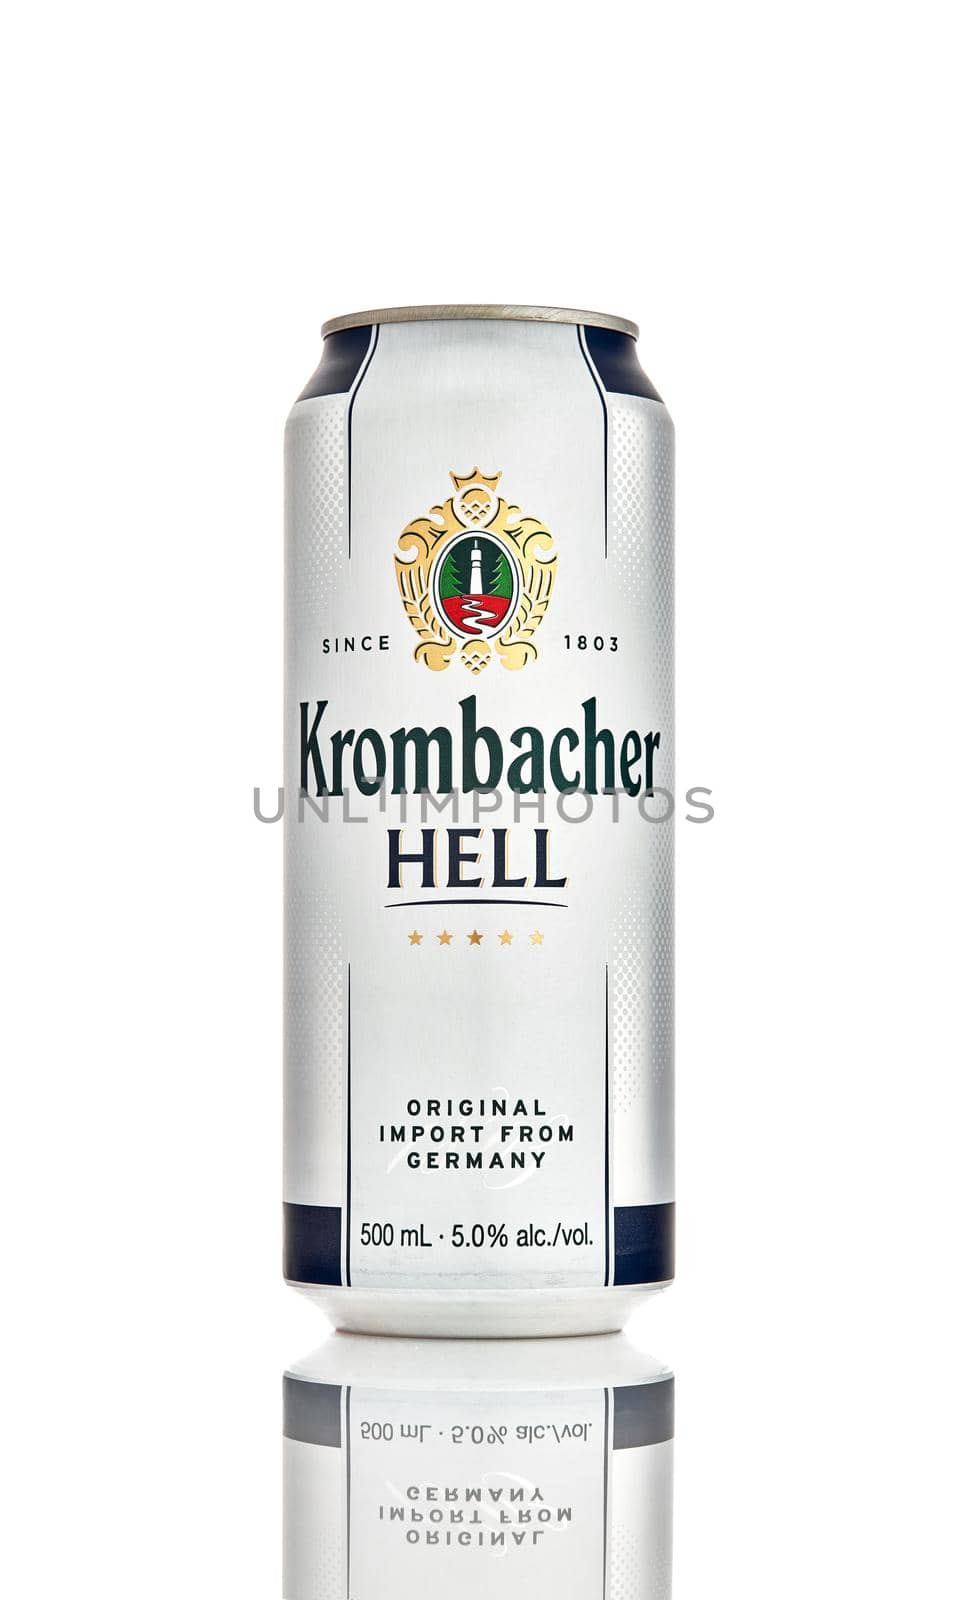 Krombacher hell on white background. Krombacher brewery was founded in 1803 in Germany. 21.06.2019, Rostov-on-Don, Russia. by EvgeniyQW